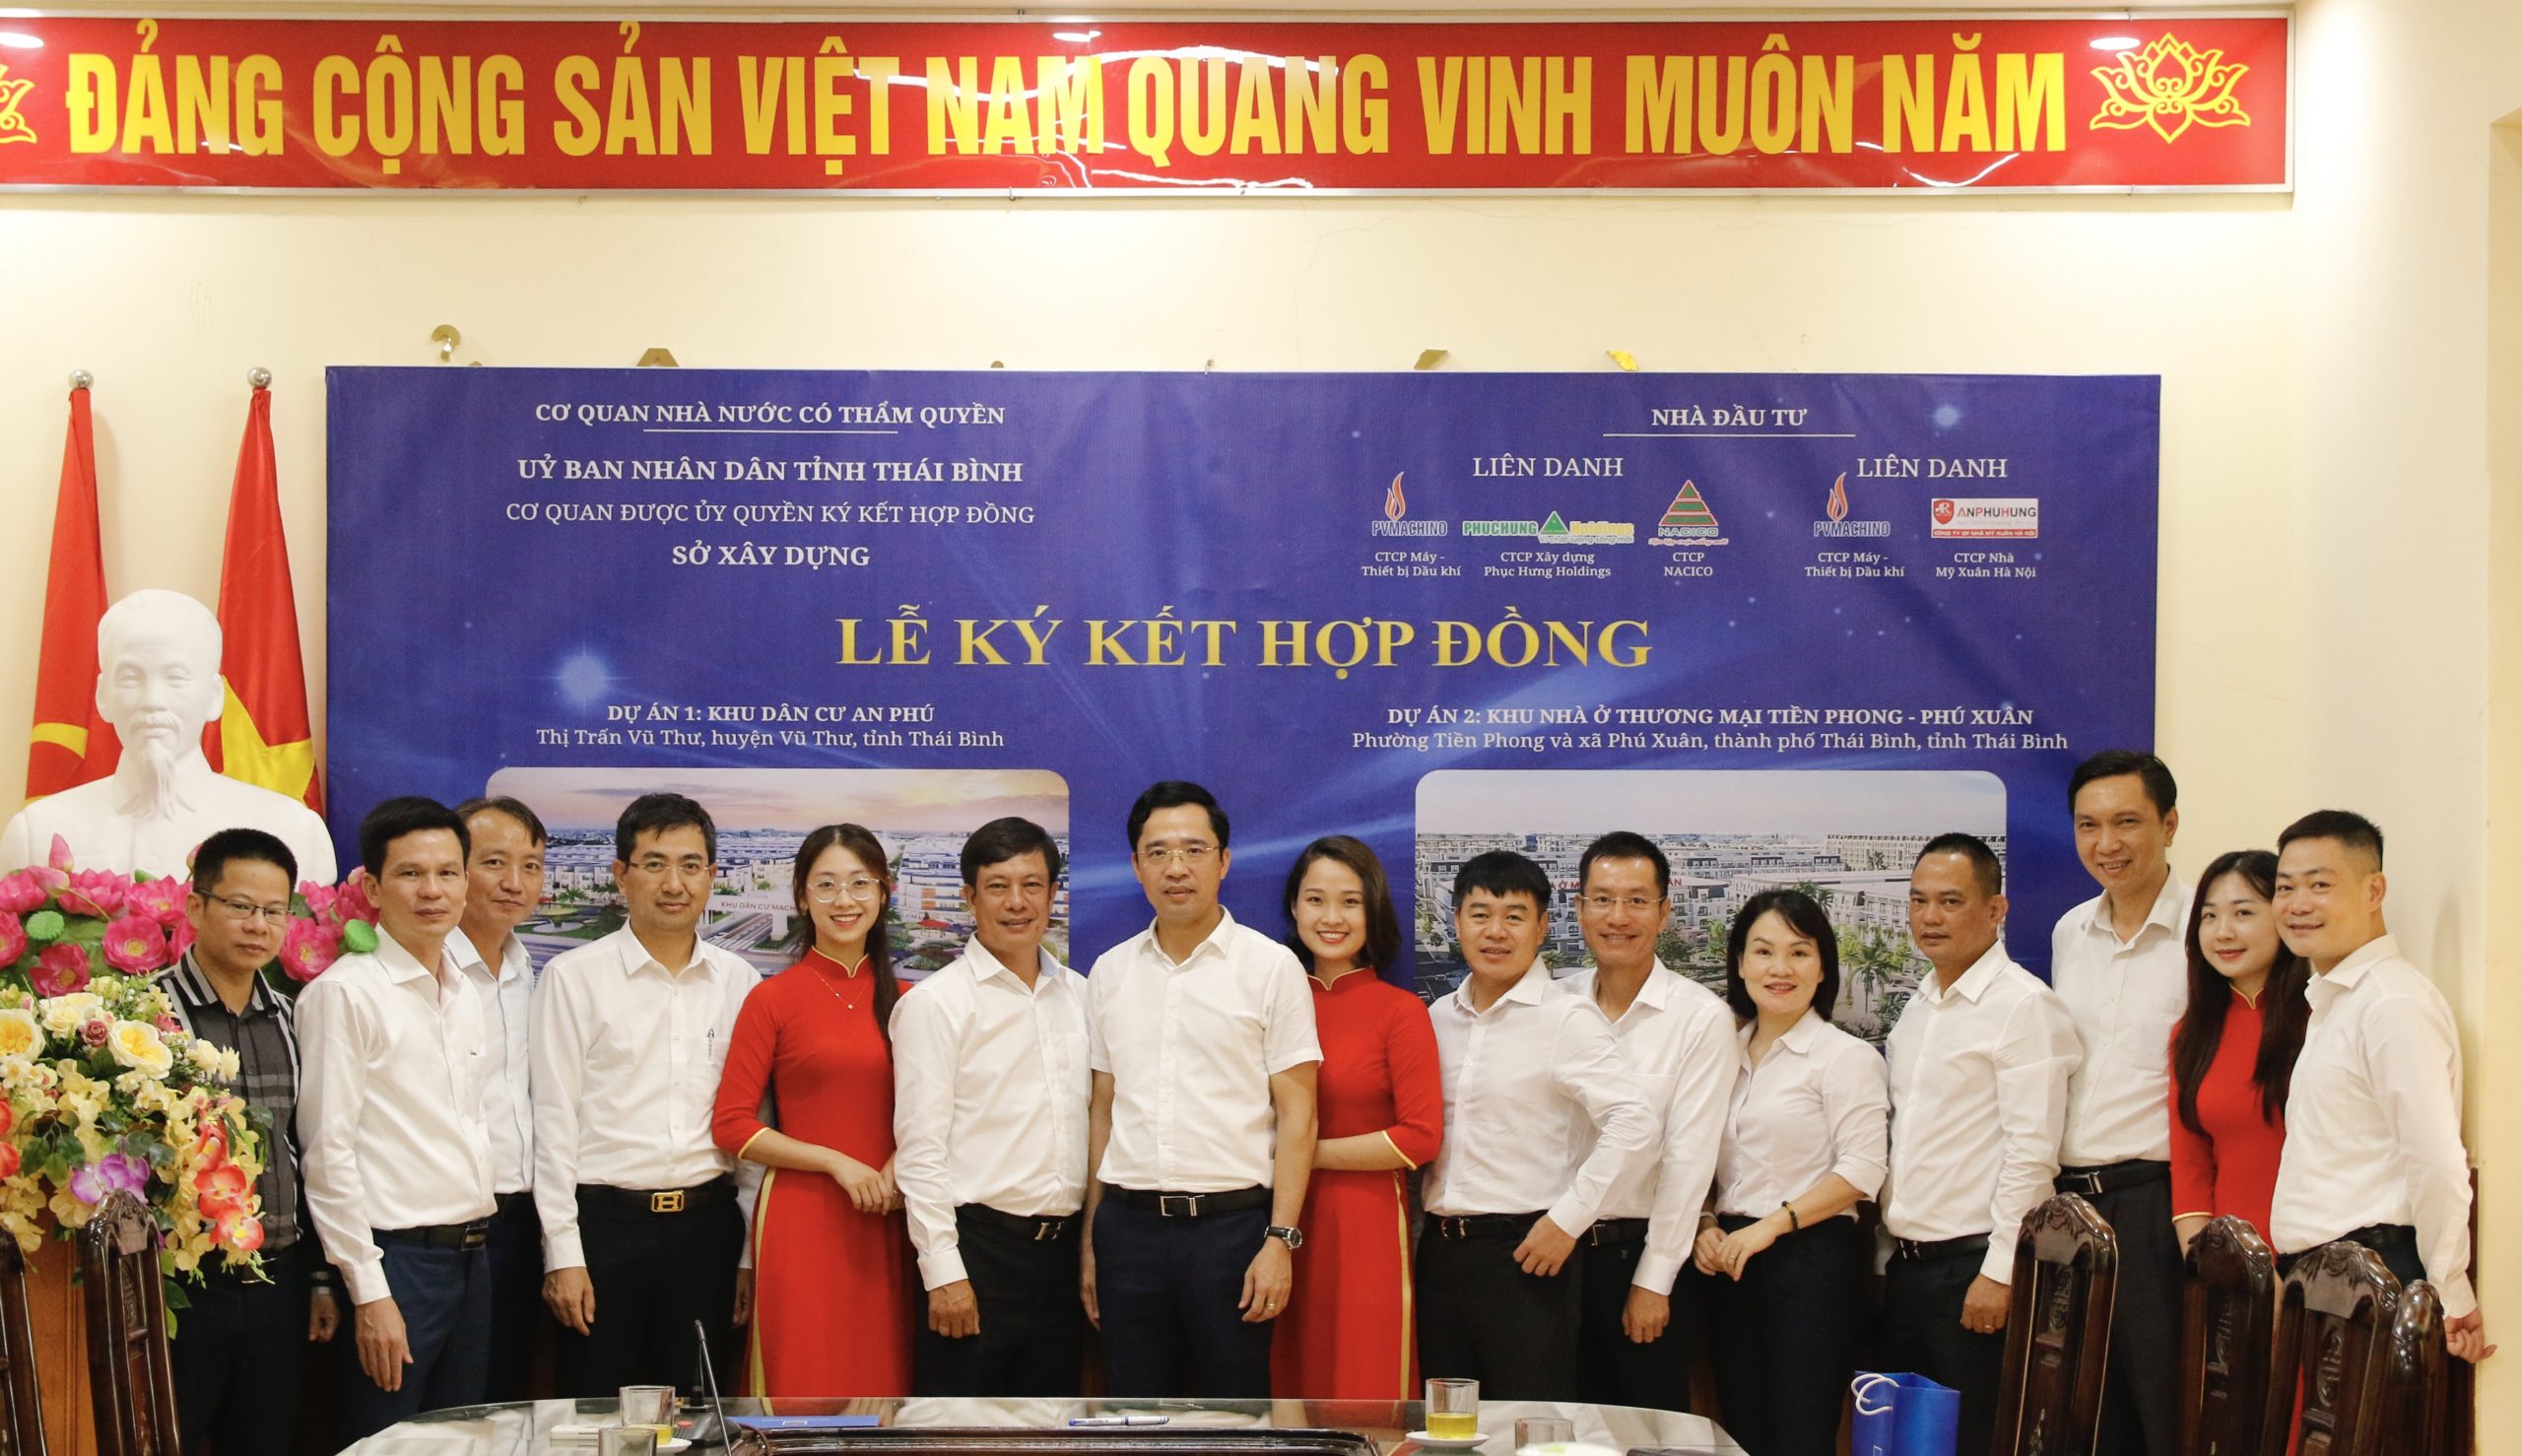 Signing Ceremony of Investment Cooperation Contract for An Phu Residential Commercial Housing Development Project, Vu Thu Town, Vu Thu District, Thai Binh Province and Commercial Housing Development Project in Tien Phong Ward and Phu Xuan commune, Thai Binh city, Thai Binh province